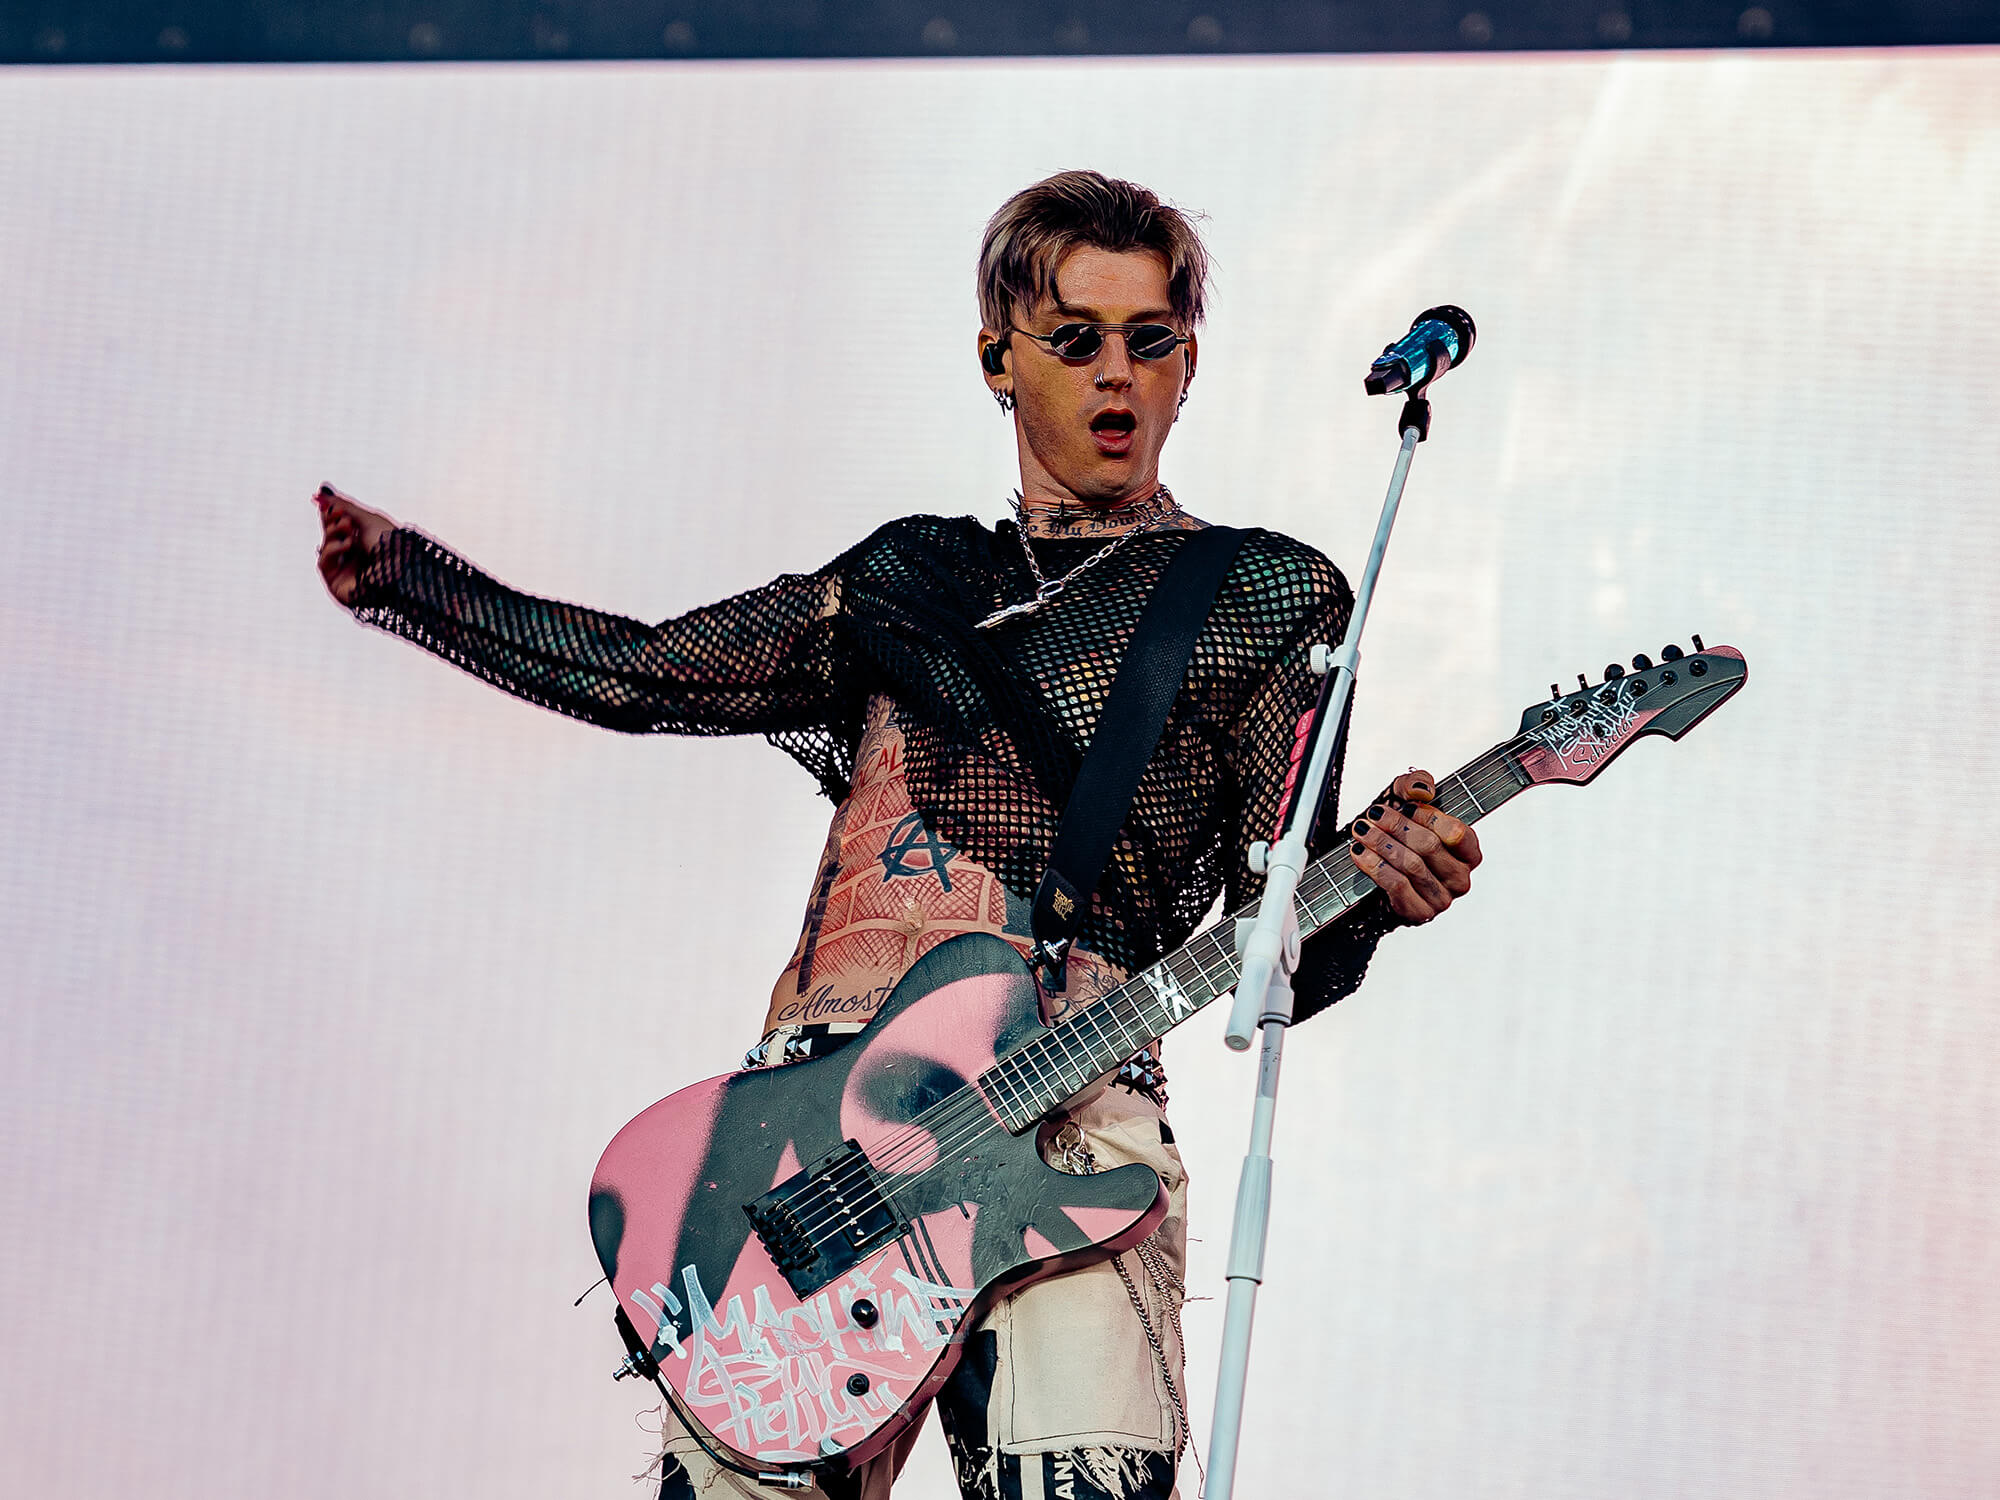 Machine Gun Kelly on stage playing his guitar. It is pink with black spray paint decorating the body. He has one arm out to the side after strumming the instrument.